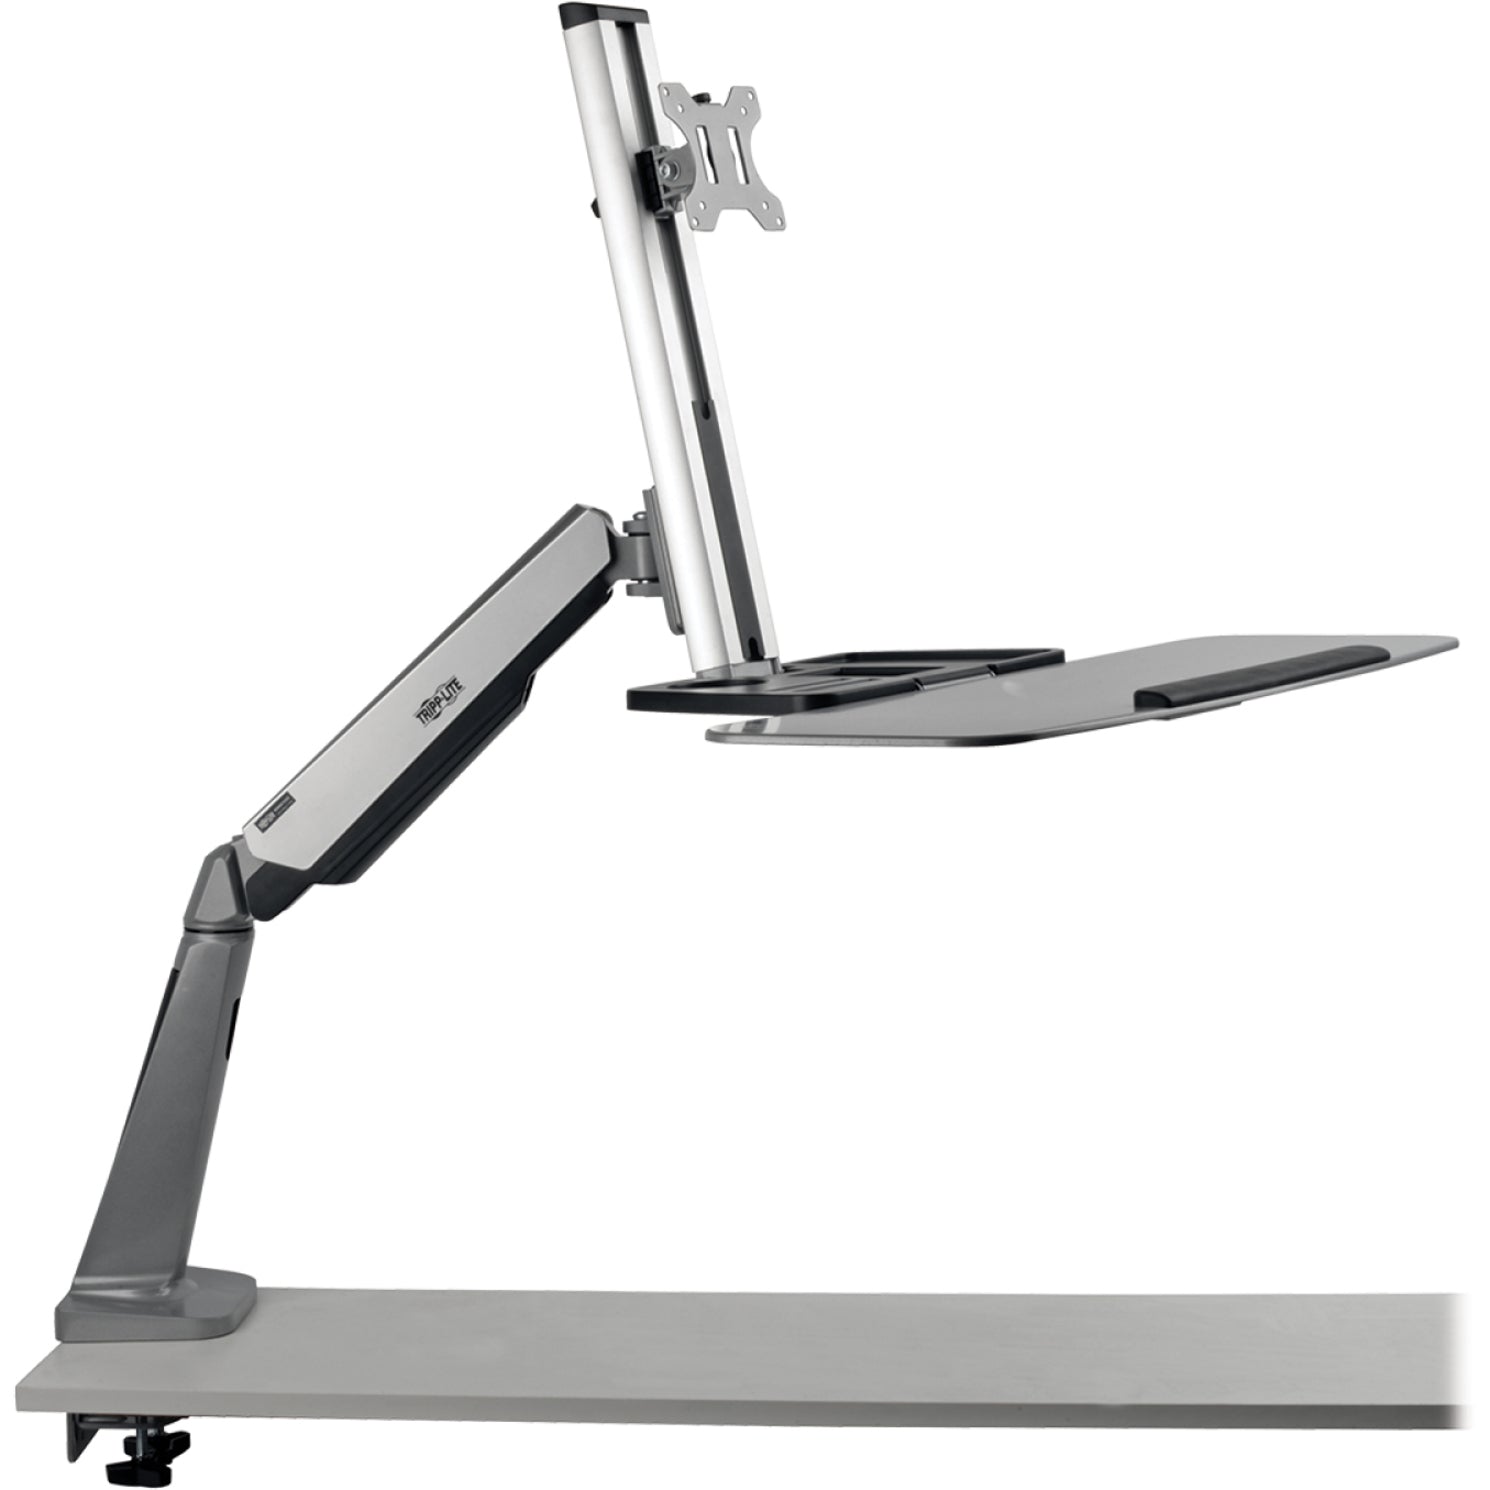 Tripp Lite WWSS1332C WorkWise Desk-Mounted Workstation, Single Display, 32" Max Screen Size, 18 lb Load Capacity